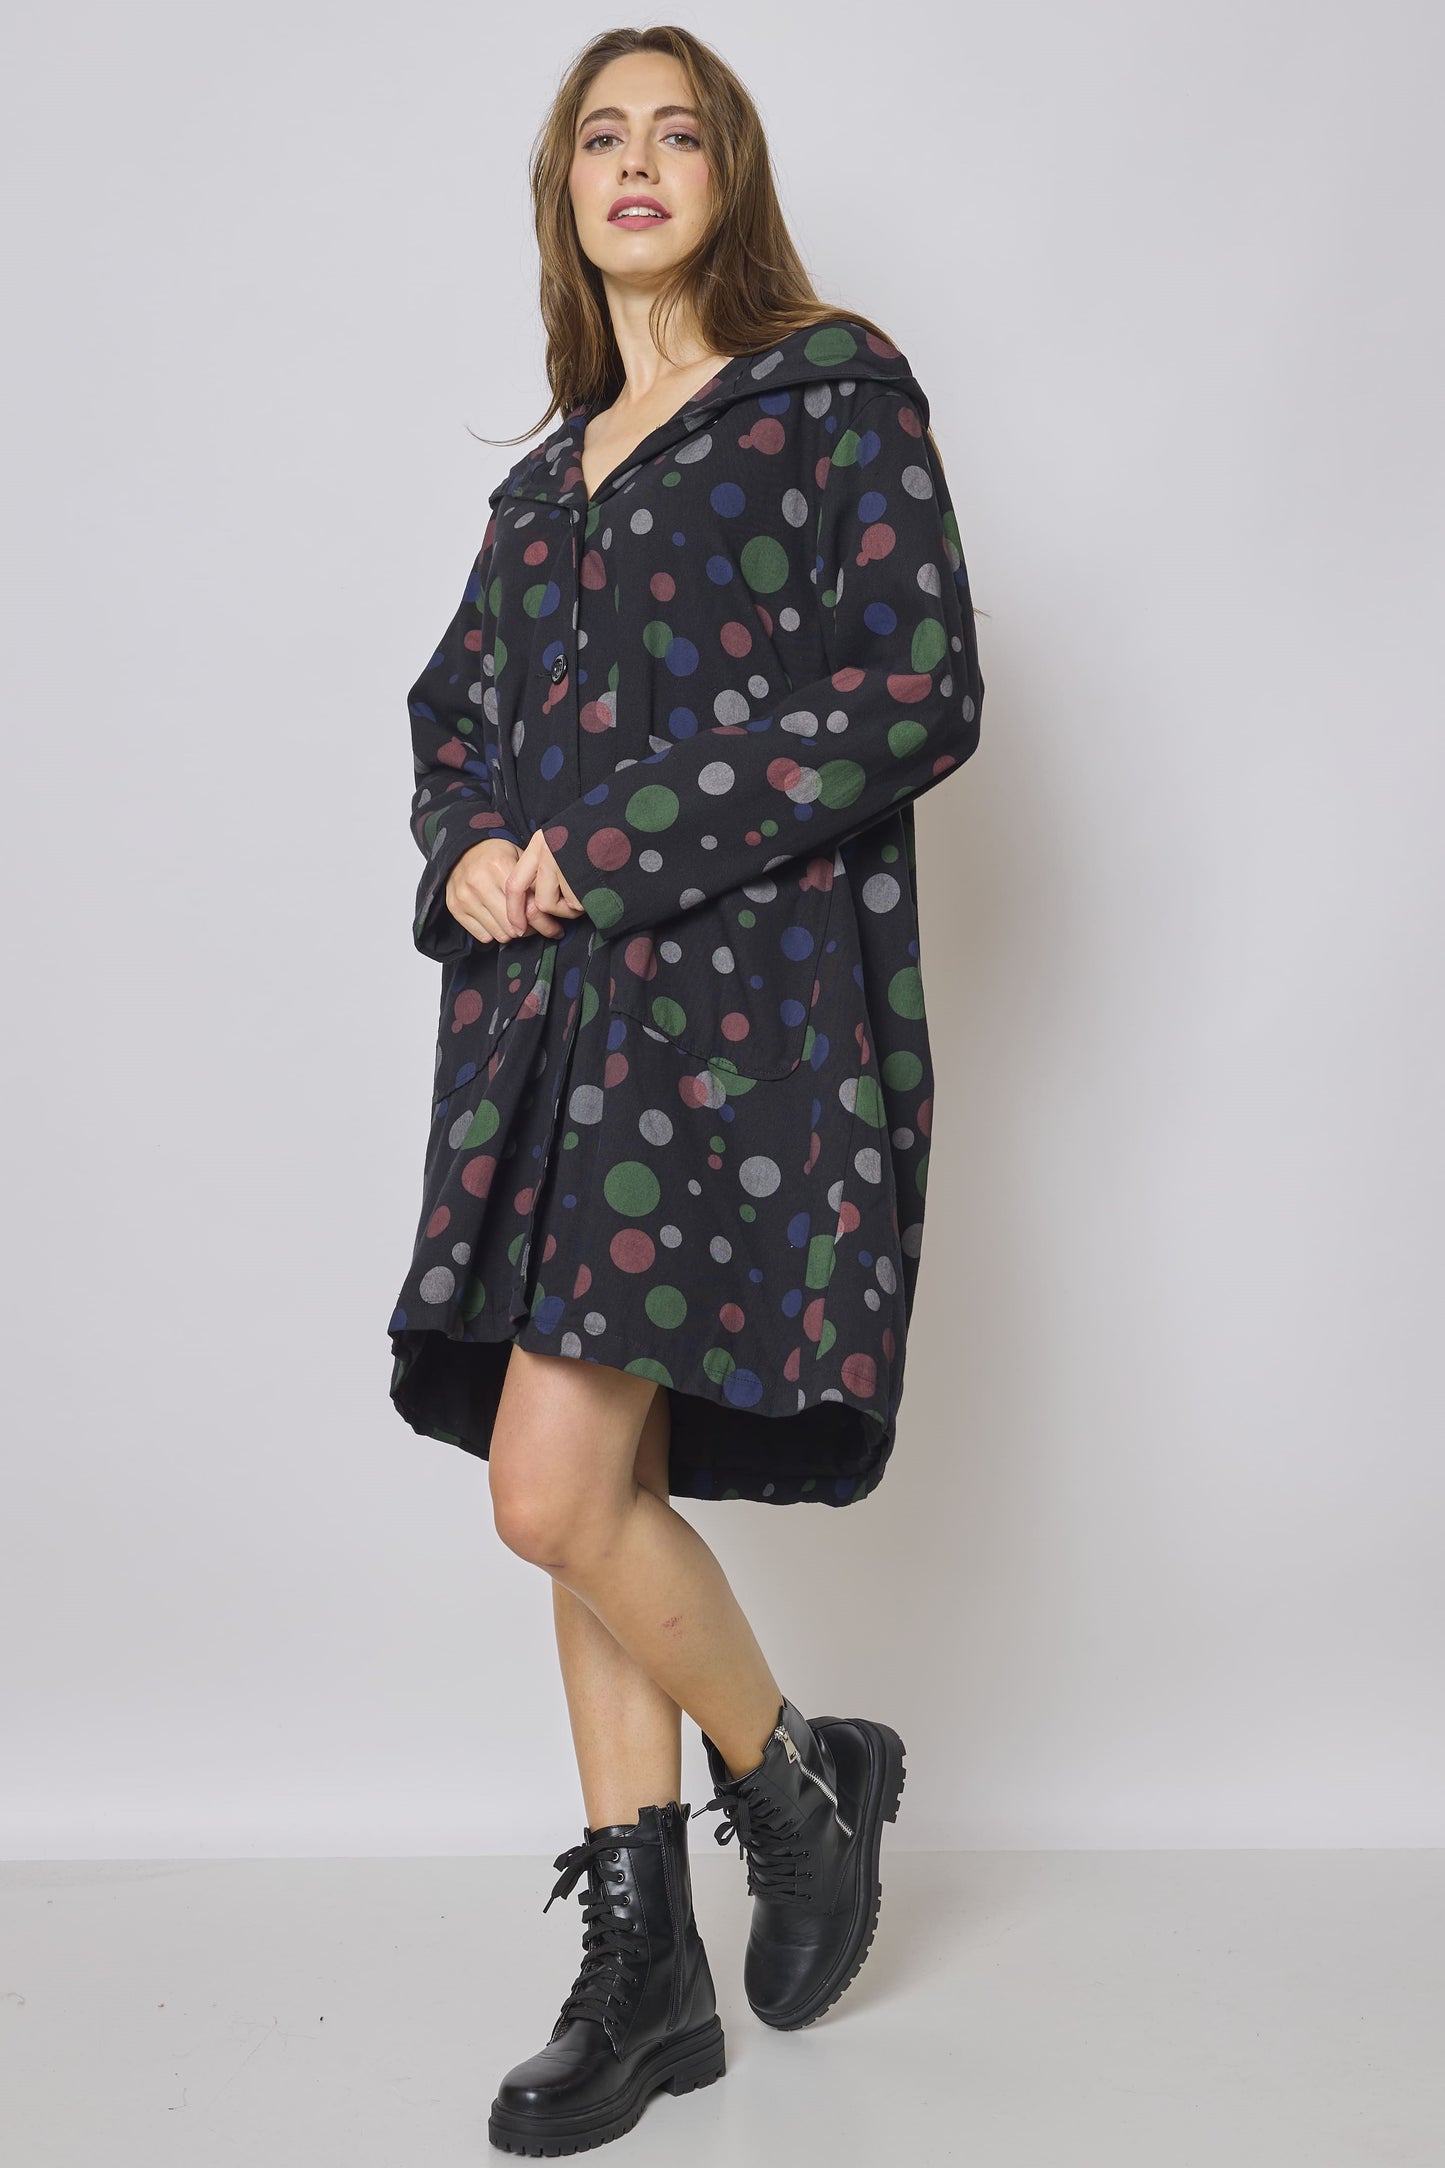 Light black coat with round patterns